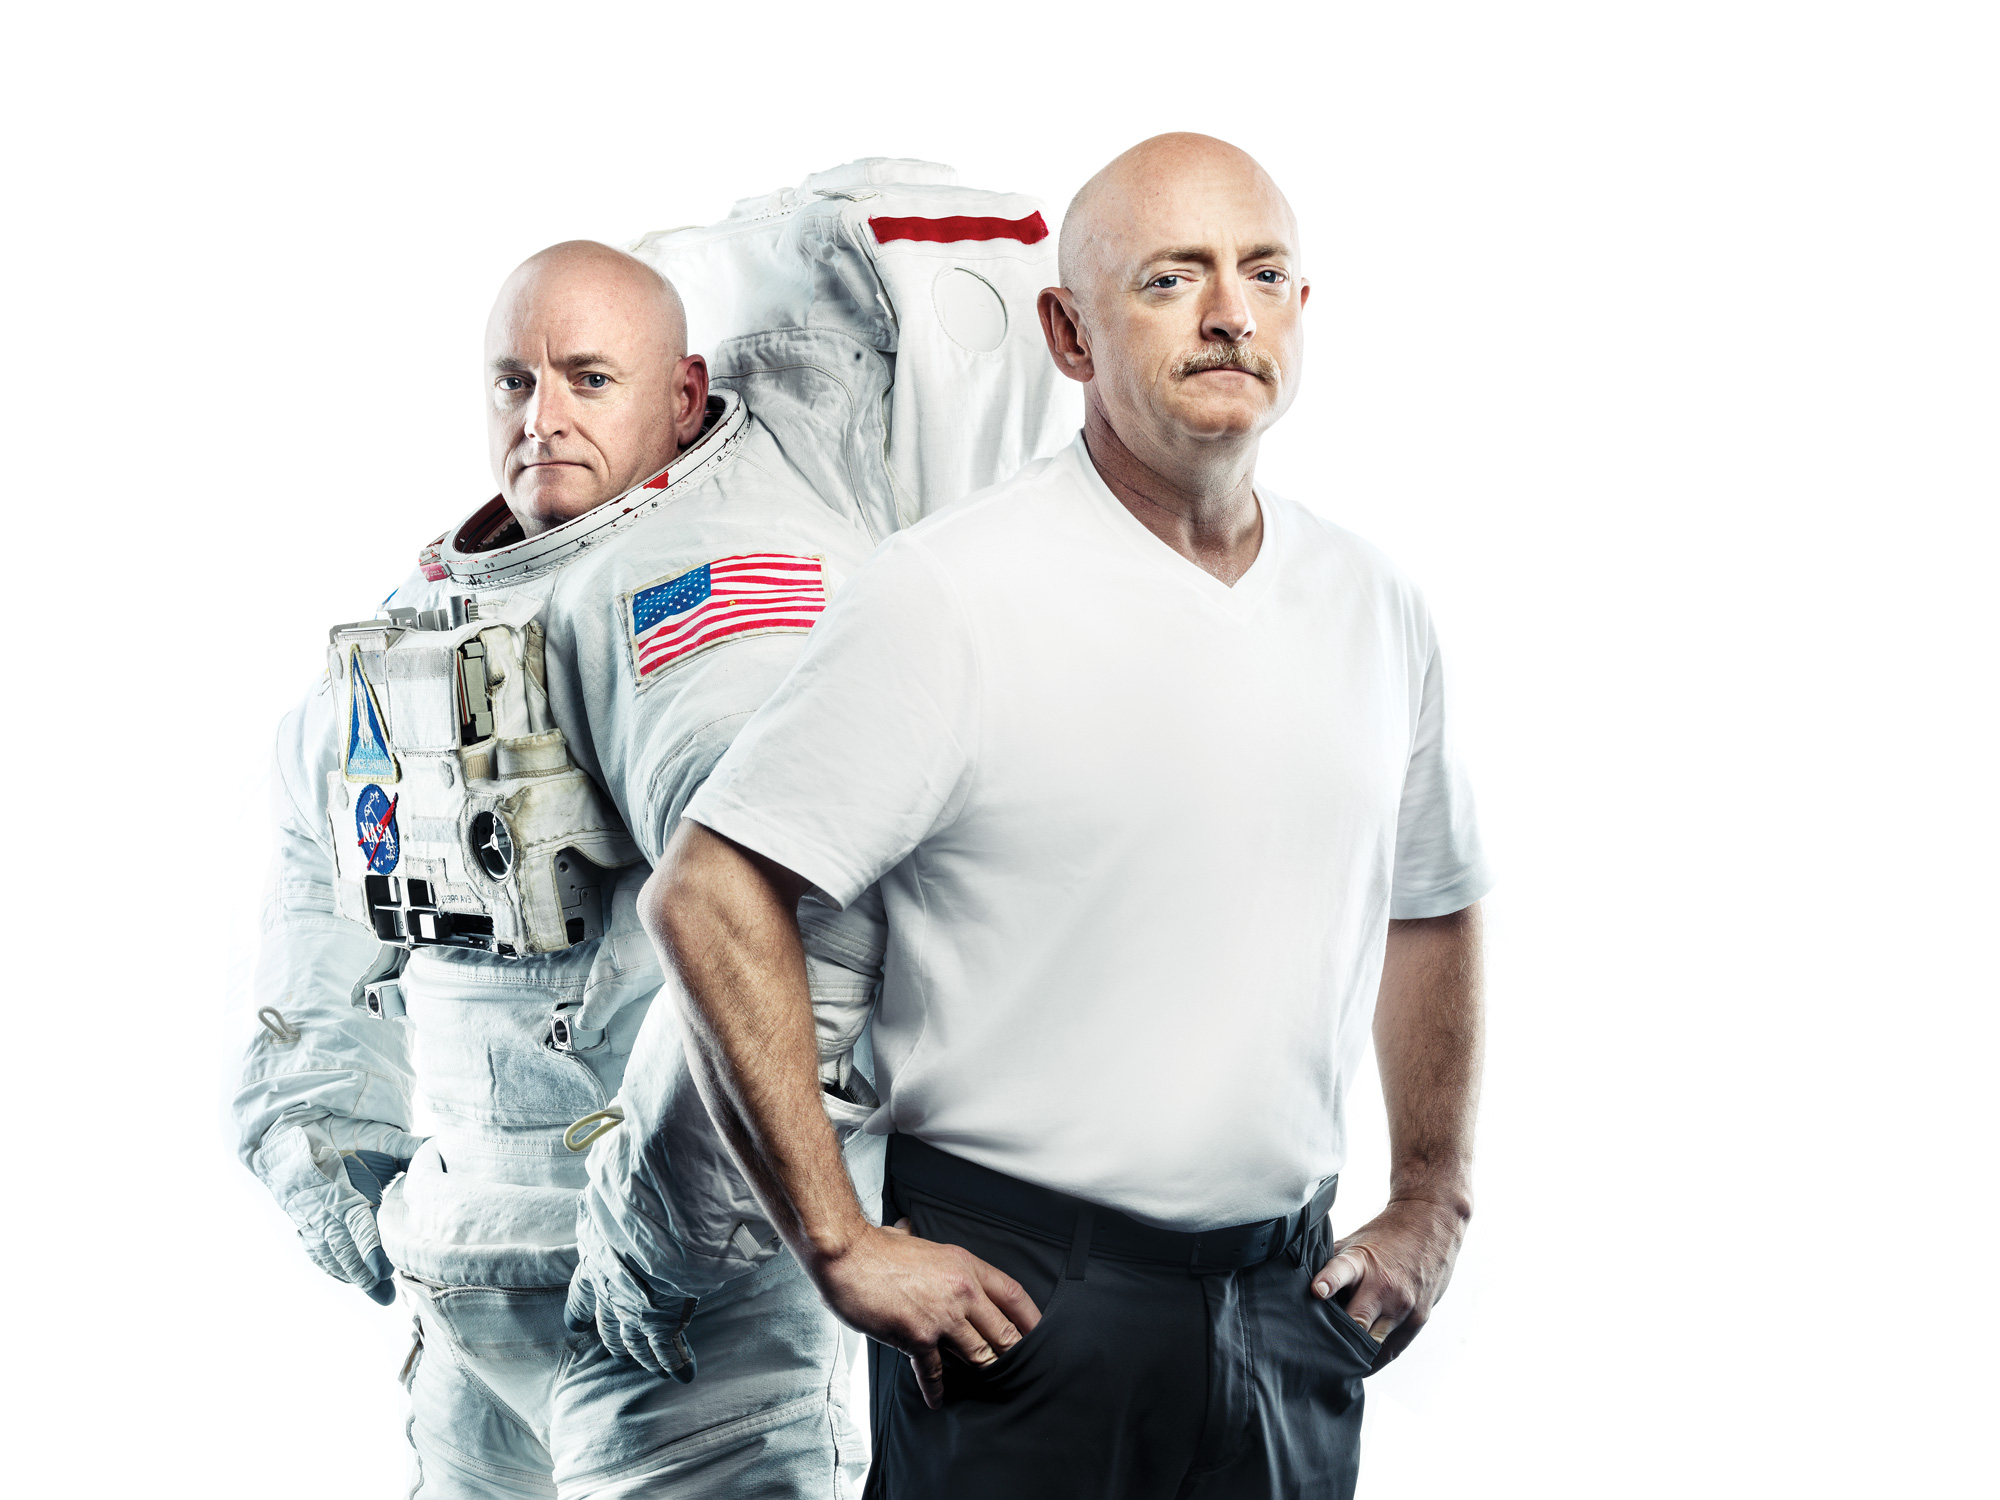 Mark and Scott Kelly are the subjects of the first twin study about space exploration.